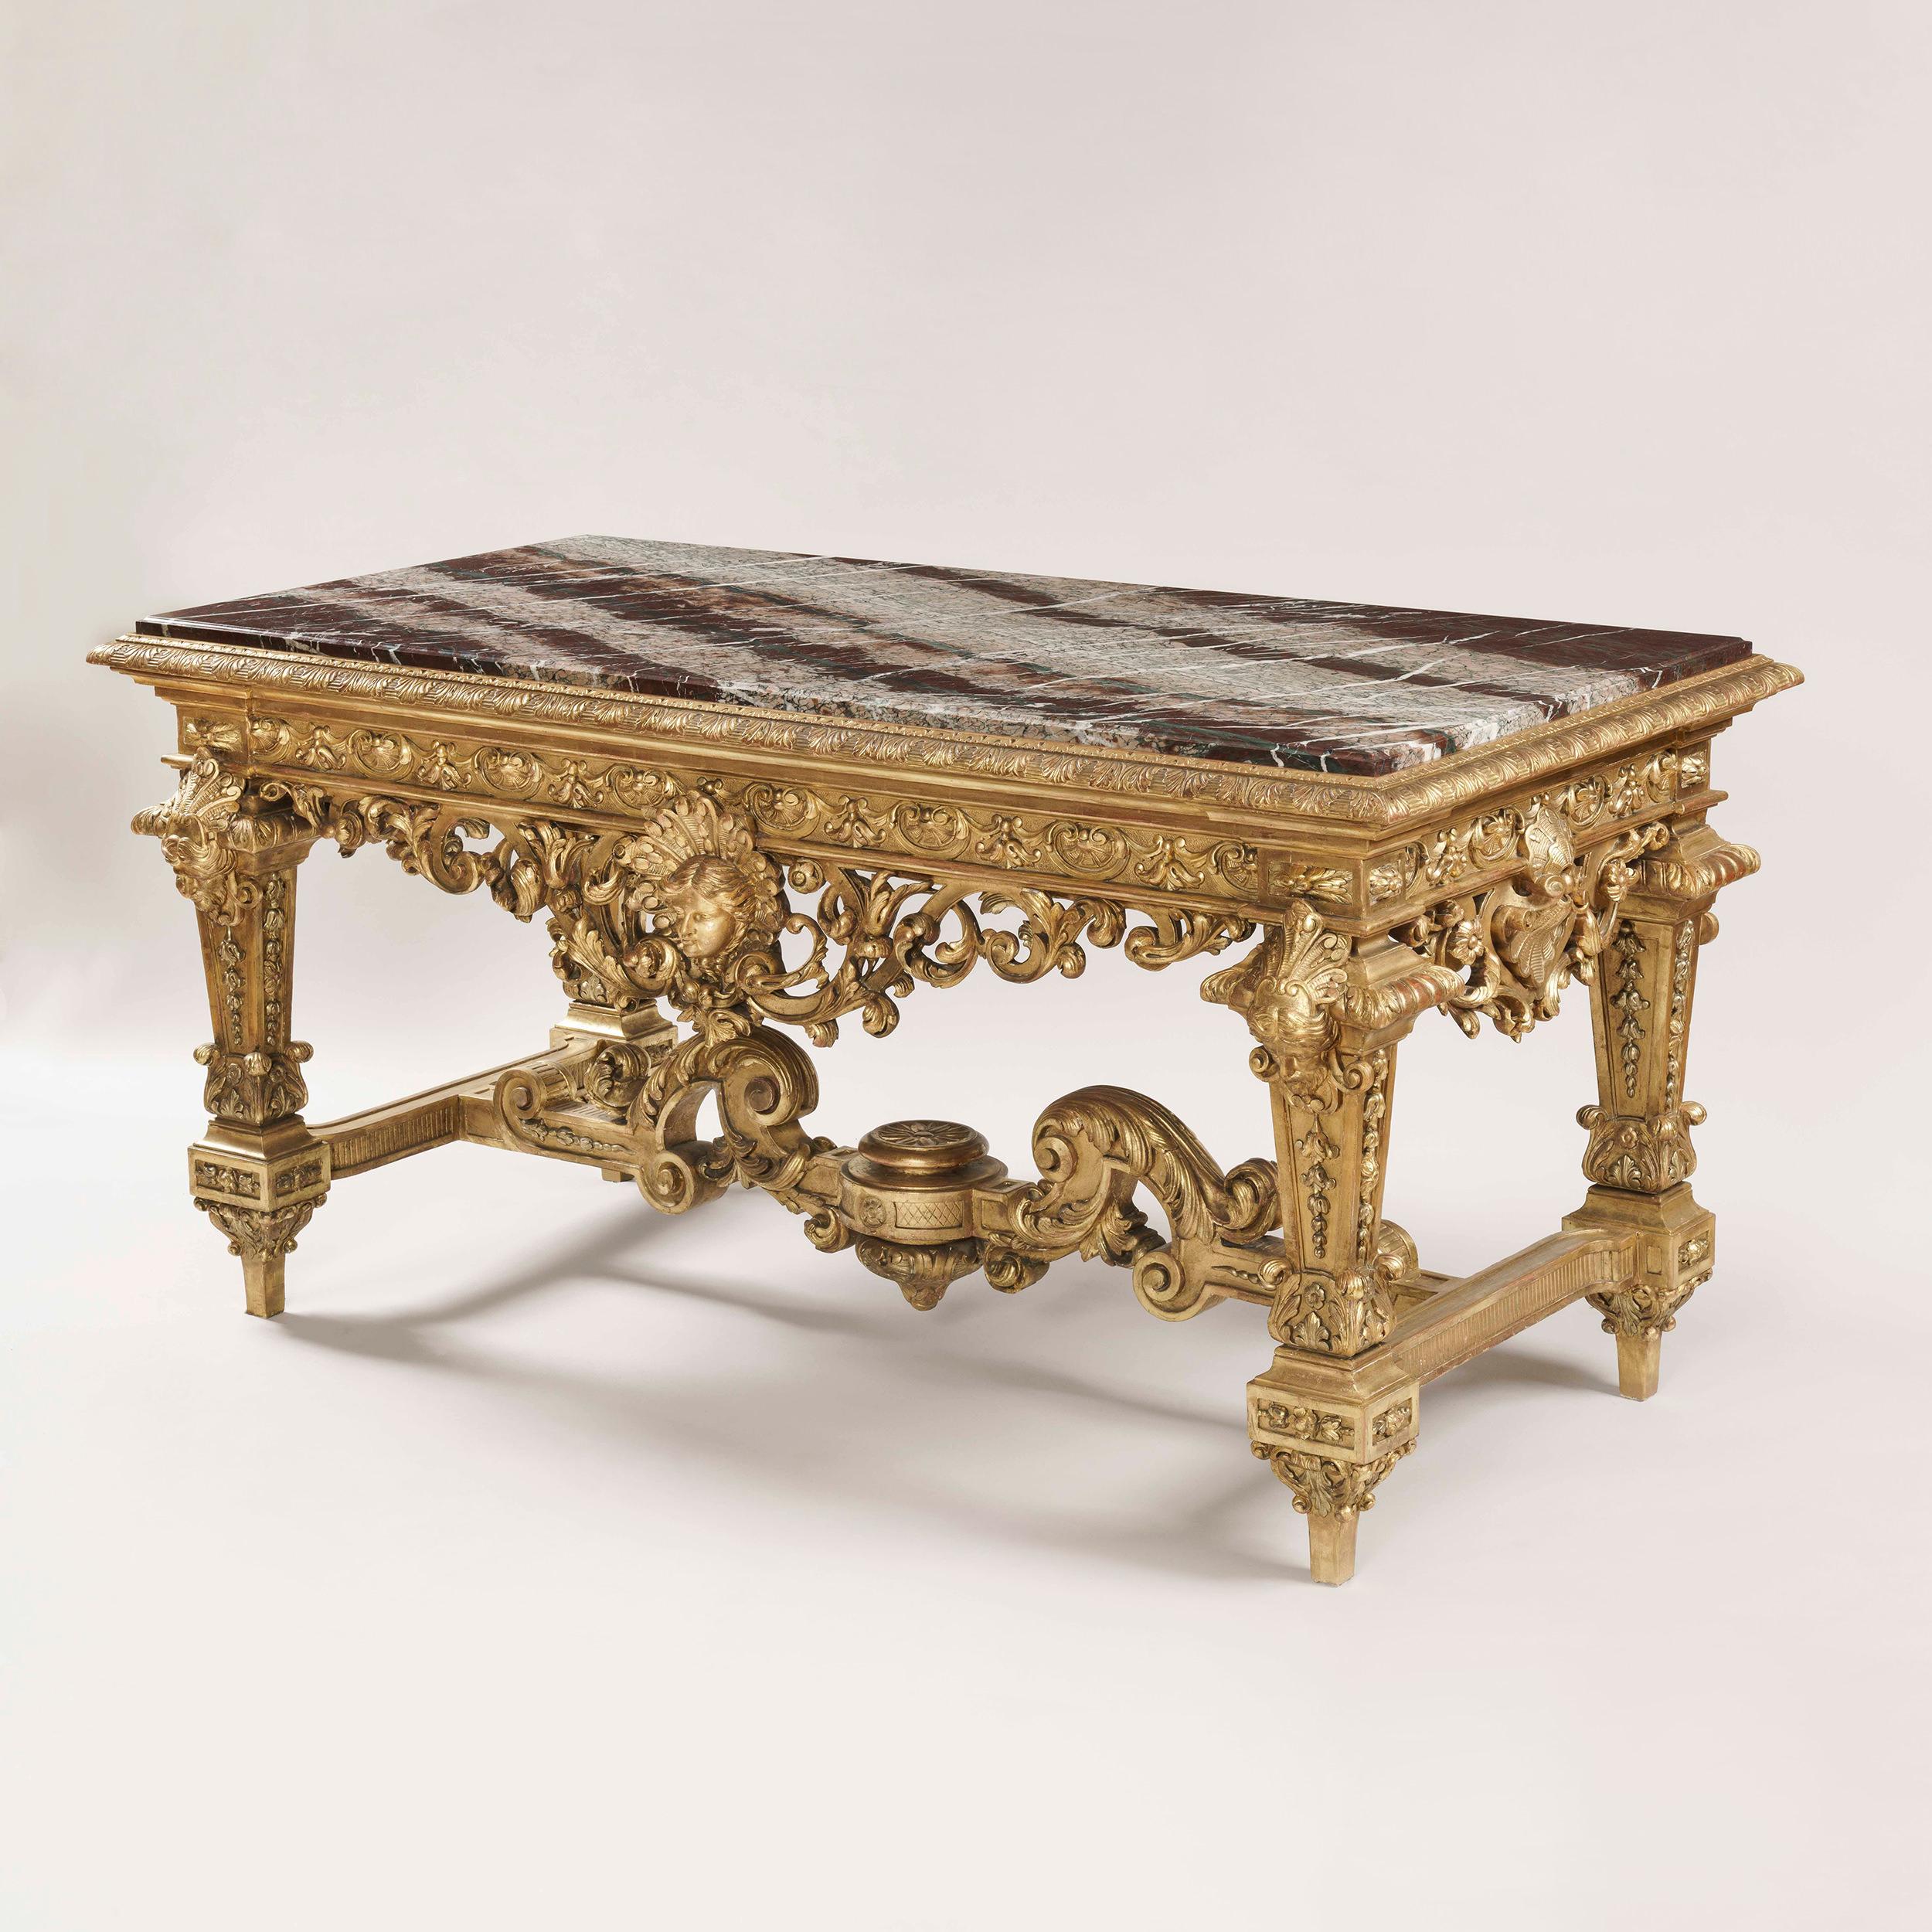 An exceptional giltwood table de Milieu
in the Louis XIV style

A true carver's delight, the giltwood center table of rectangular form supported on four baluster form legs interjoined by a stretcher, the free-standing table incorporating pierced